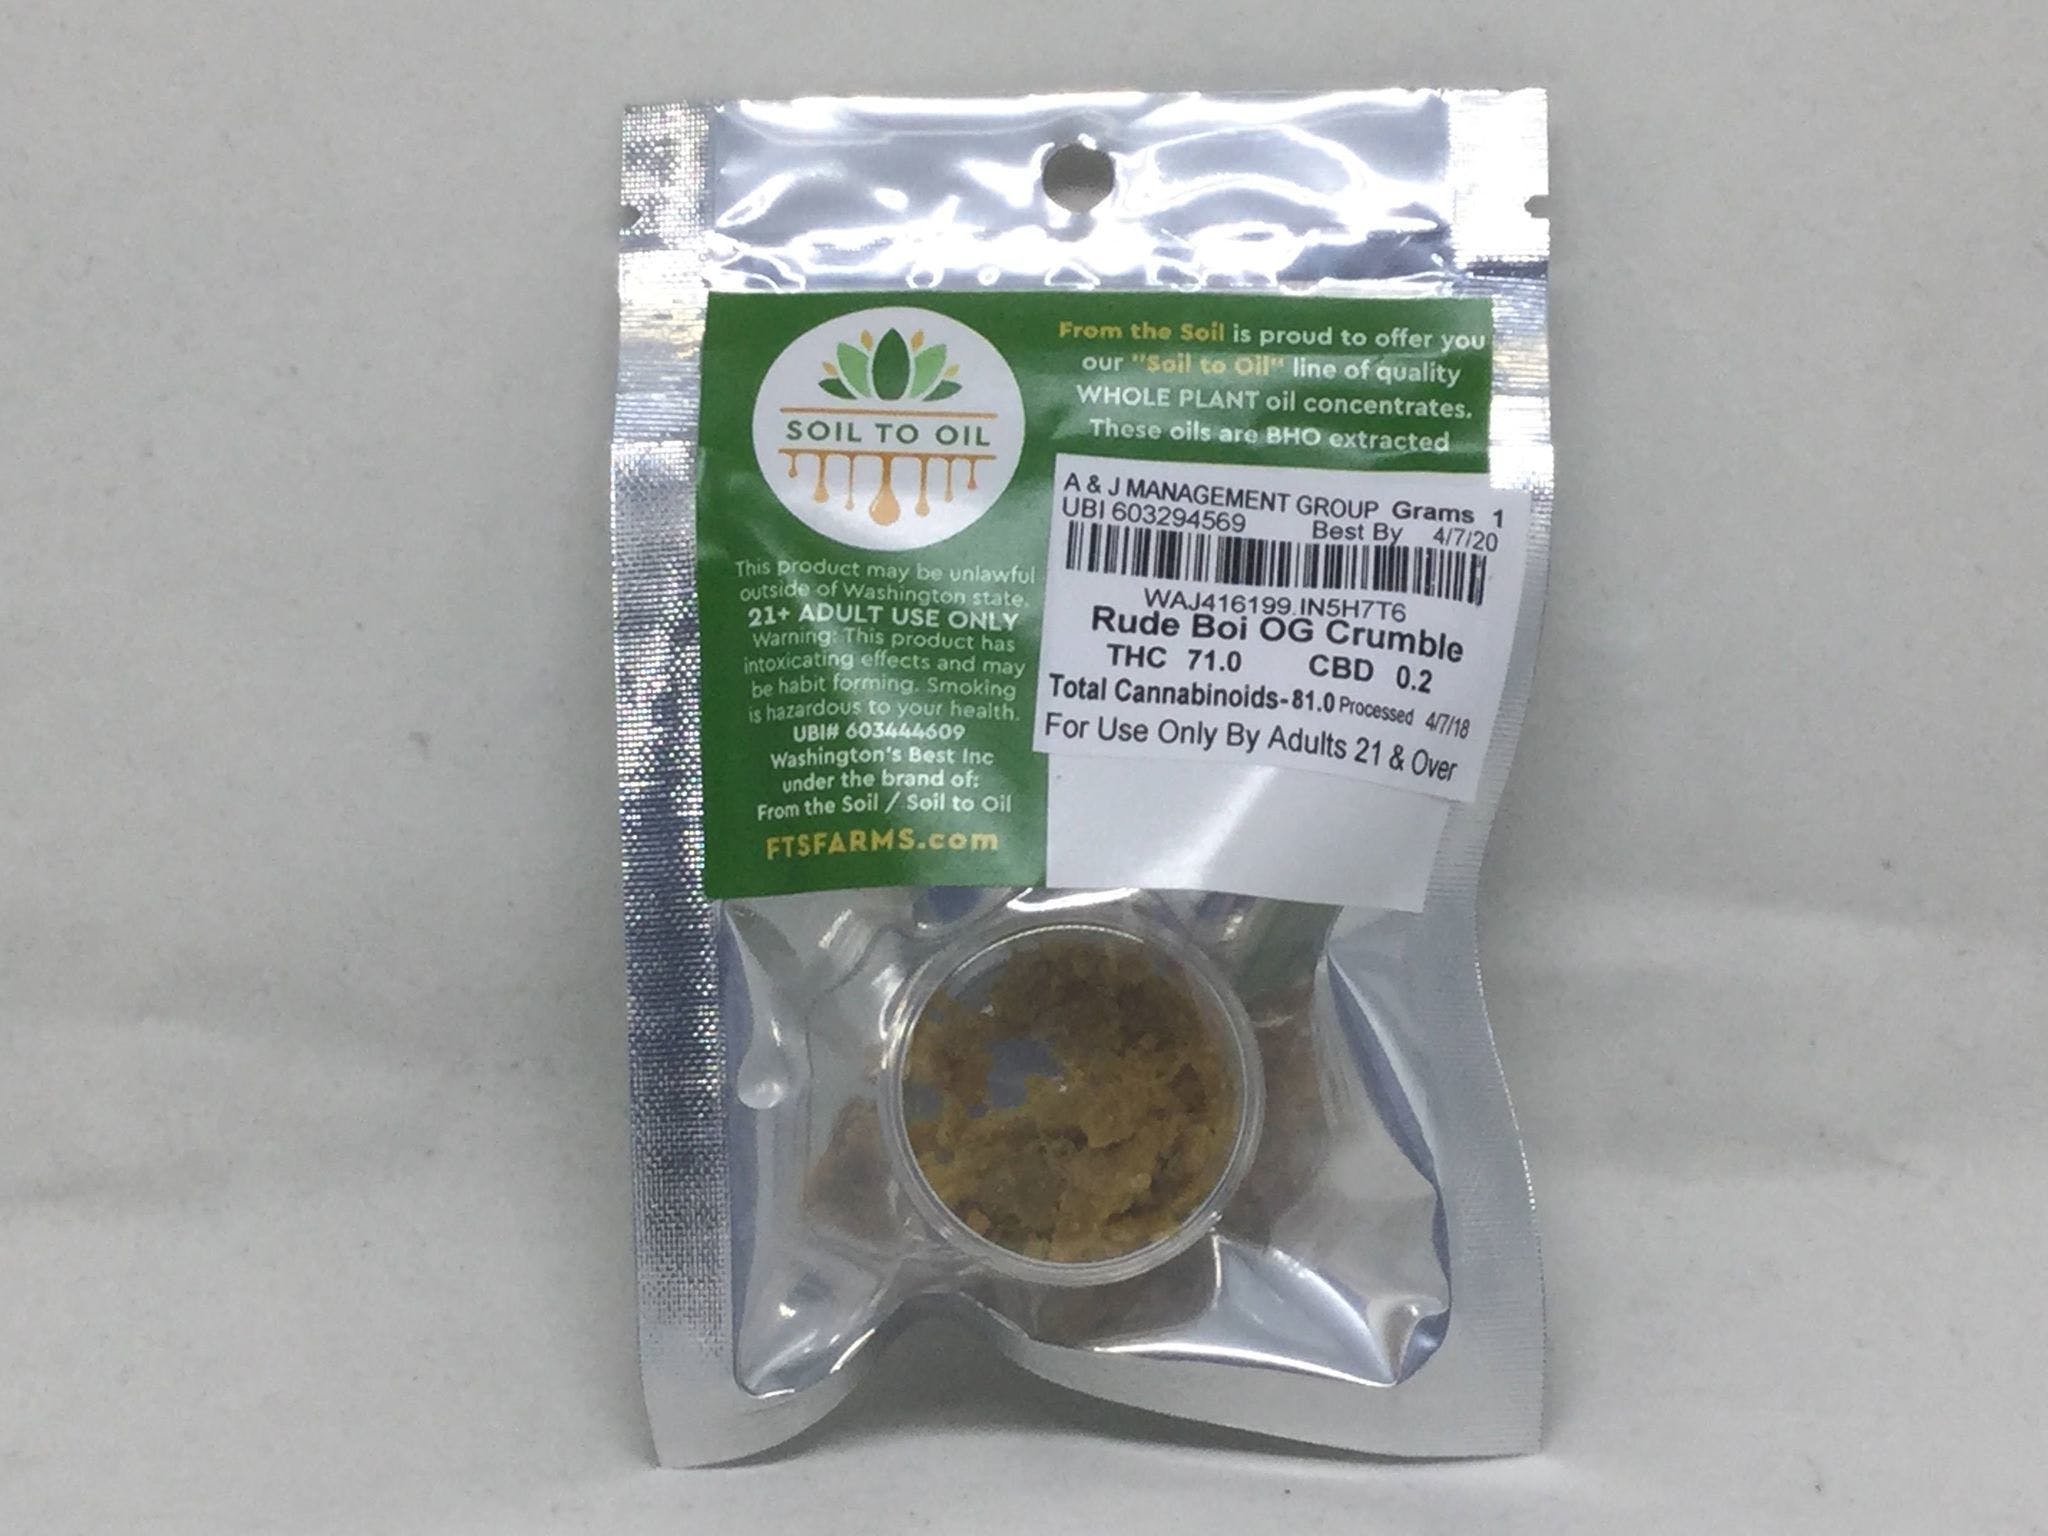 marijuana-dispensaries-234-division-st-nw-olympia-from-the-soil-rude-boi